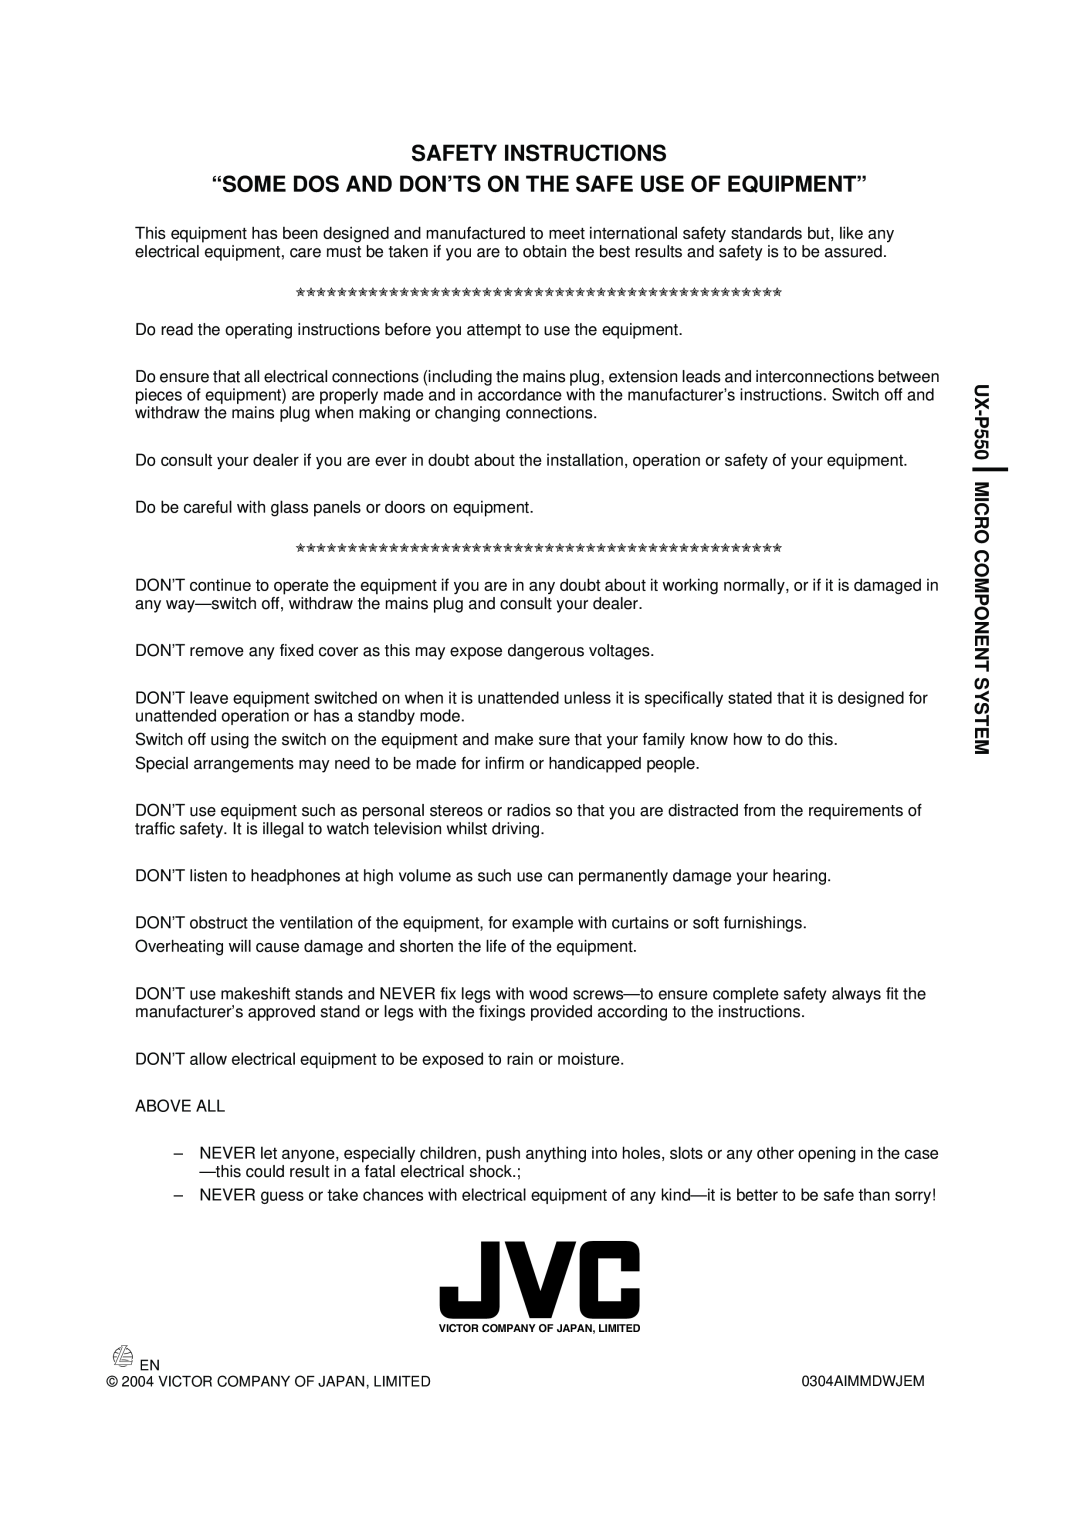 JVC manual Safety Instructions, UX-P550MICRO COMPONENT SYSTEM 